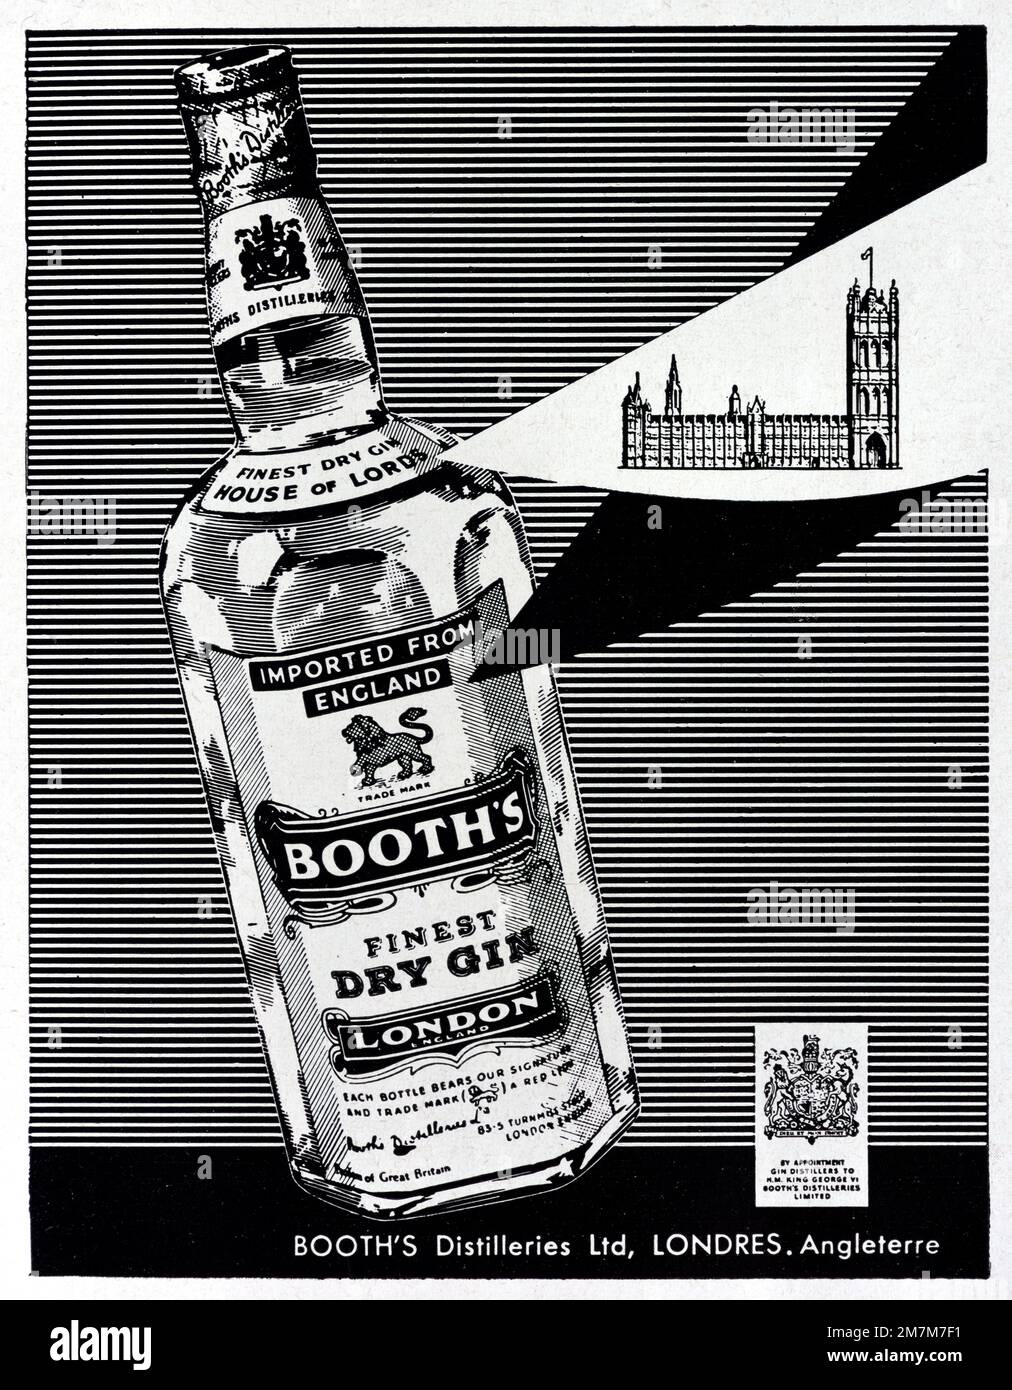 Vintage or Old Advert, Advertisement, publication or Illustration for bottle of Booths Gin 1956 illustrato con un'immagine delle Houses of Parliament London. Foto Stock